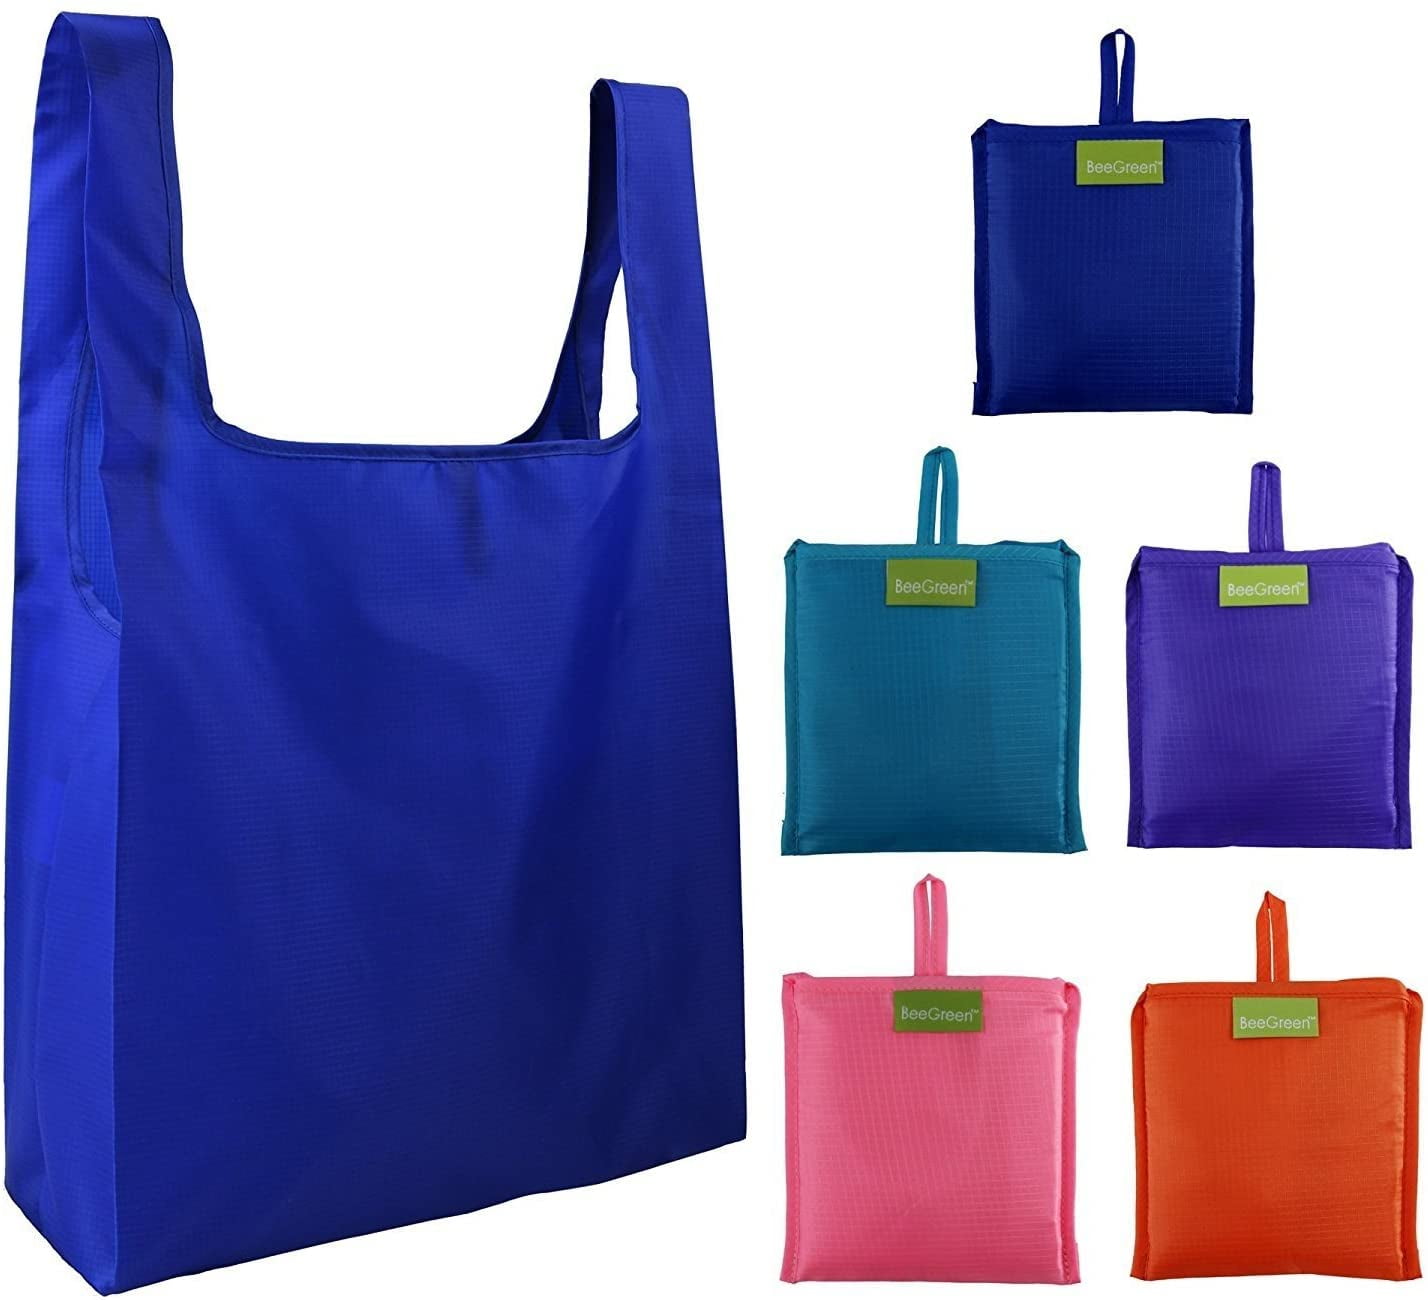 Details about   Foraineam Reusable Grocery Bags Set Durable Heavy Duty Tote Bag Collapsible Box 